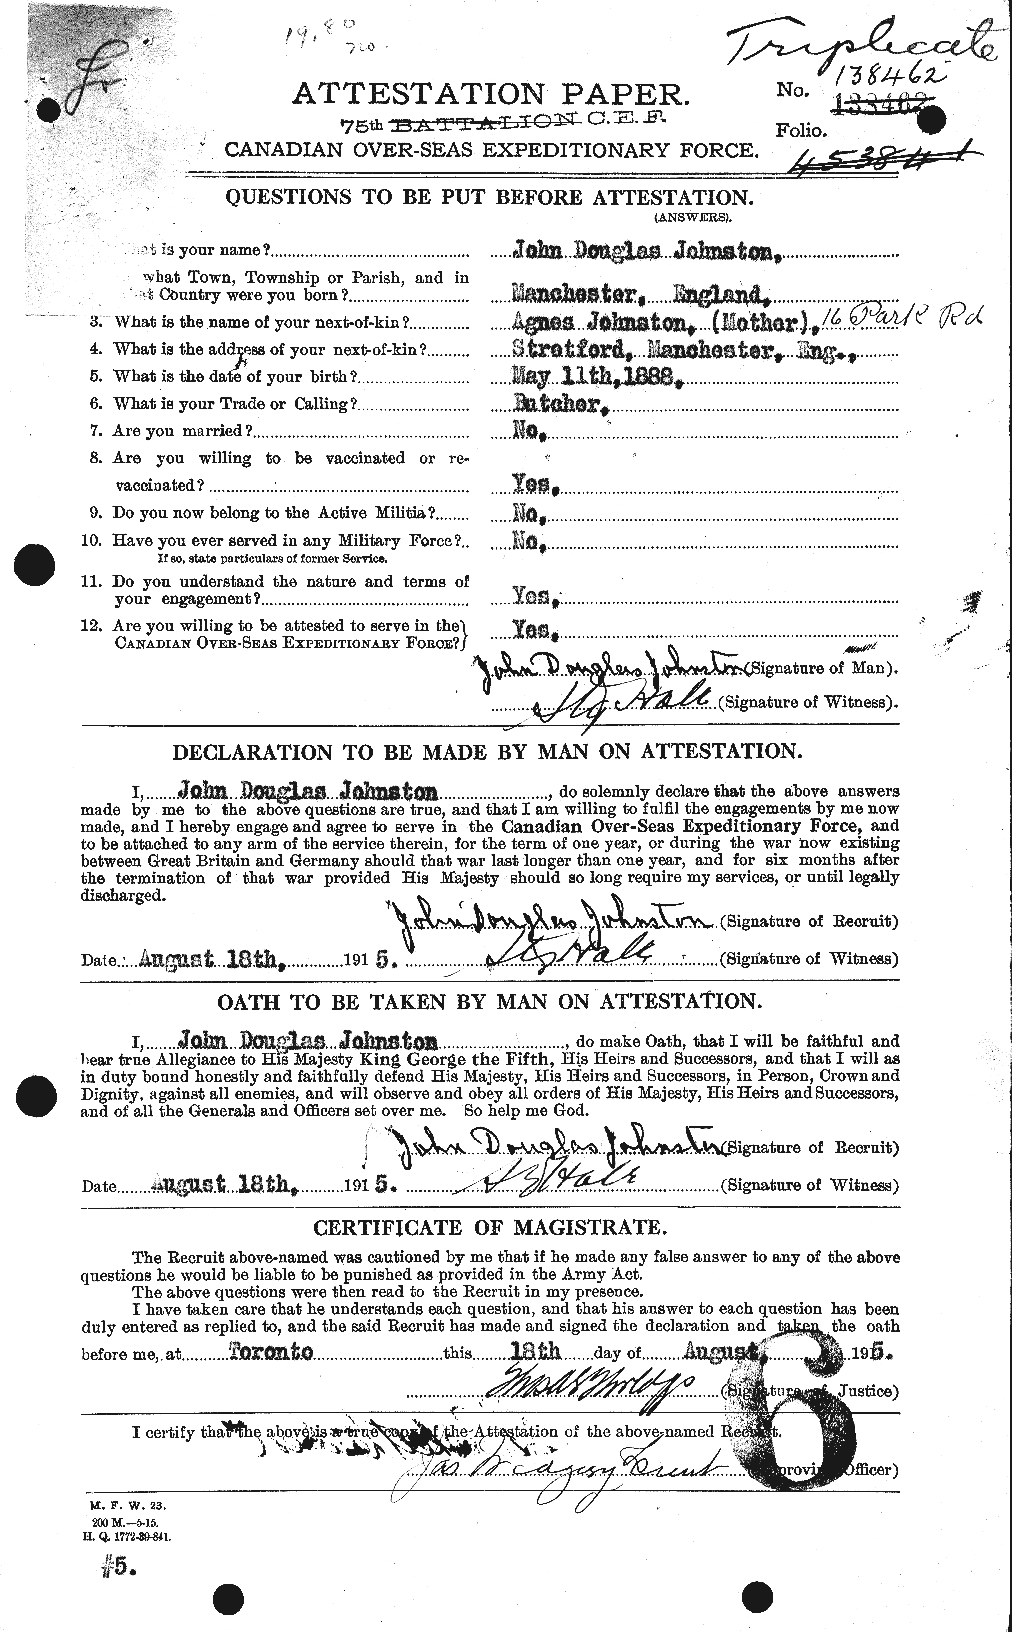 Personnel Records of the First World War - CEF 422823a